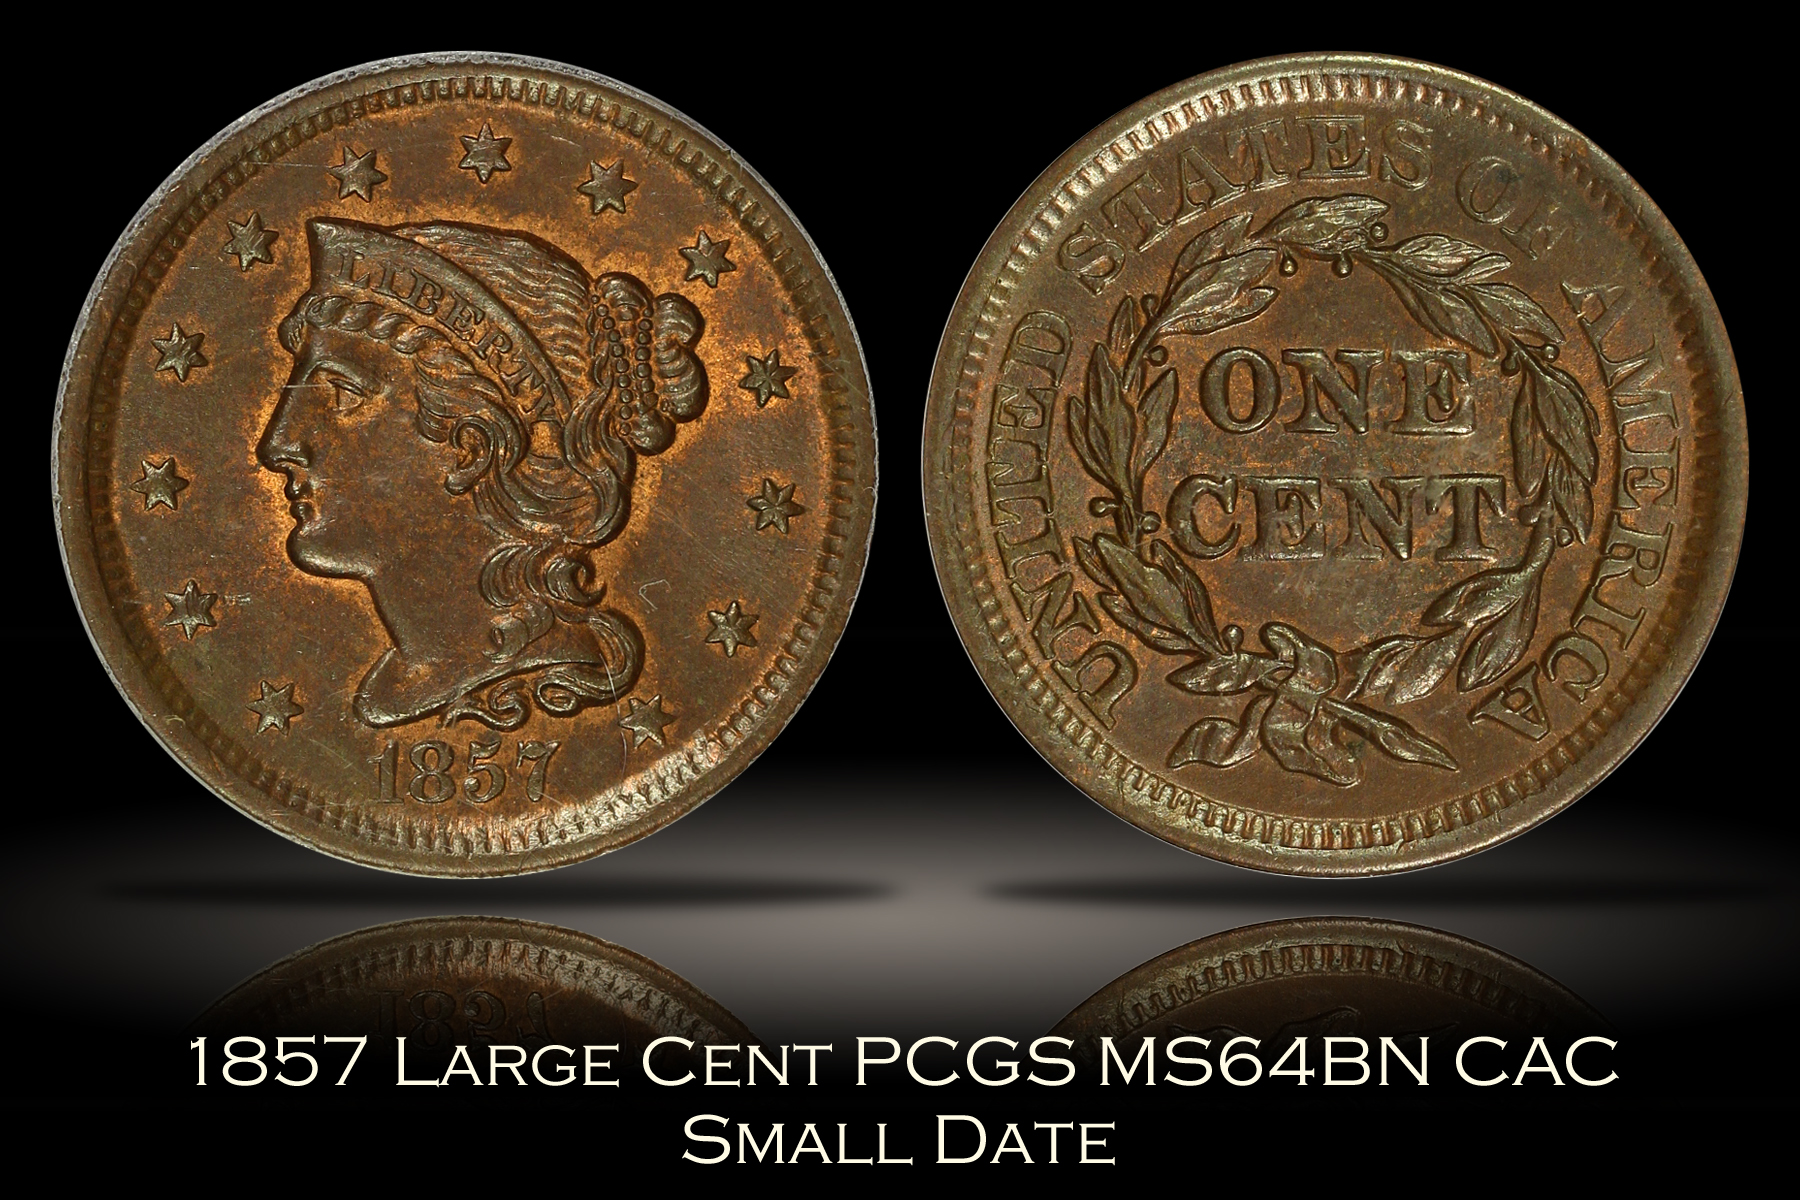 1857 Small Date Large Cent PCGS MS64BN CAC